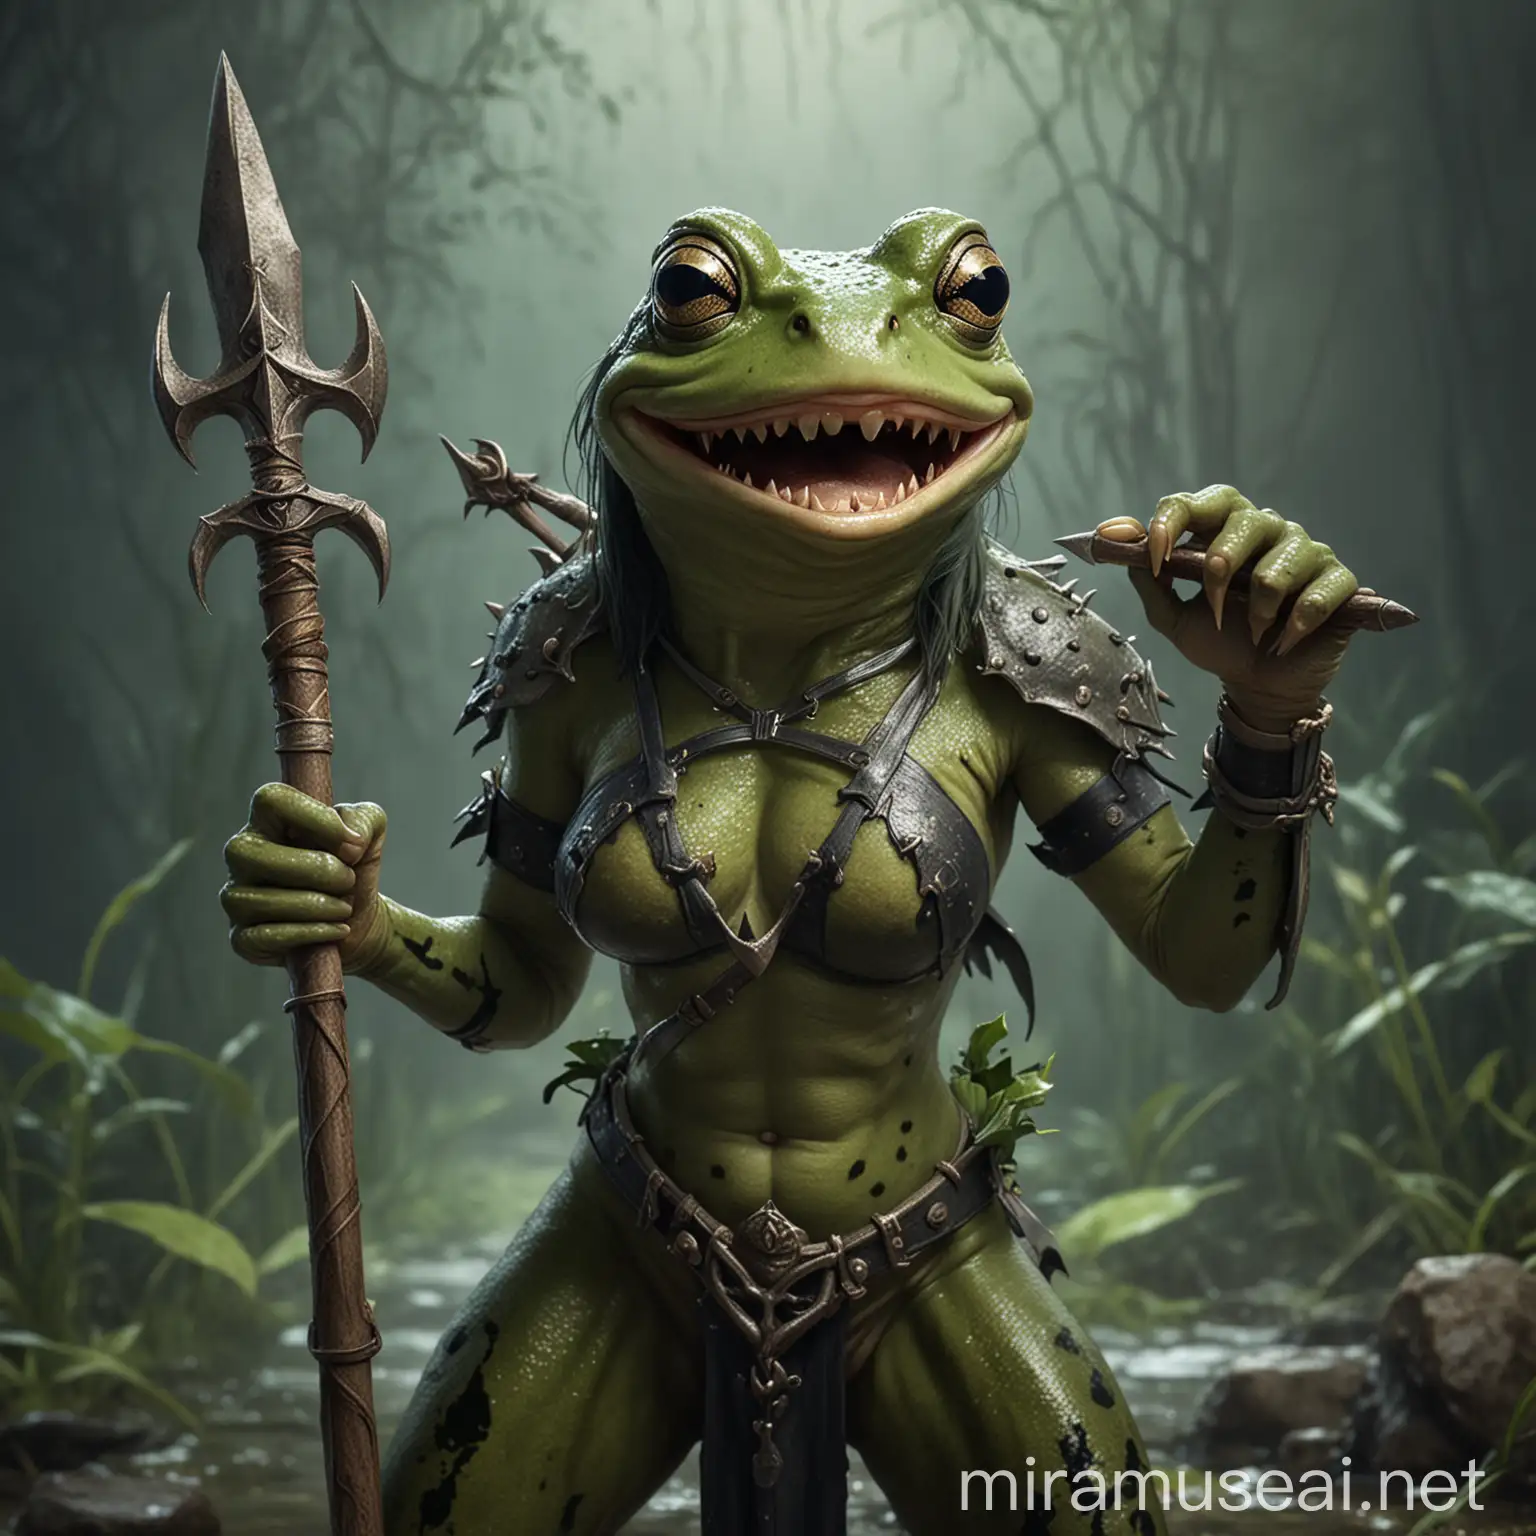 strong female frog with fangs and claws holding a trident